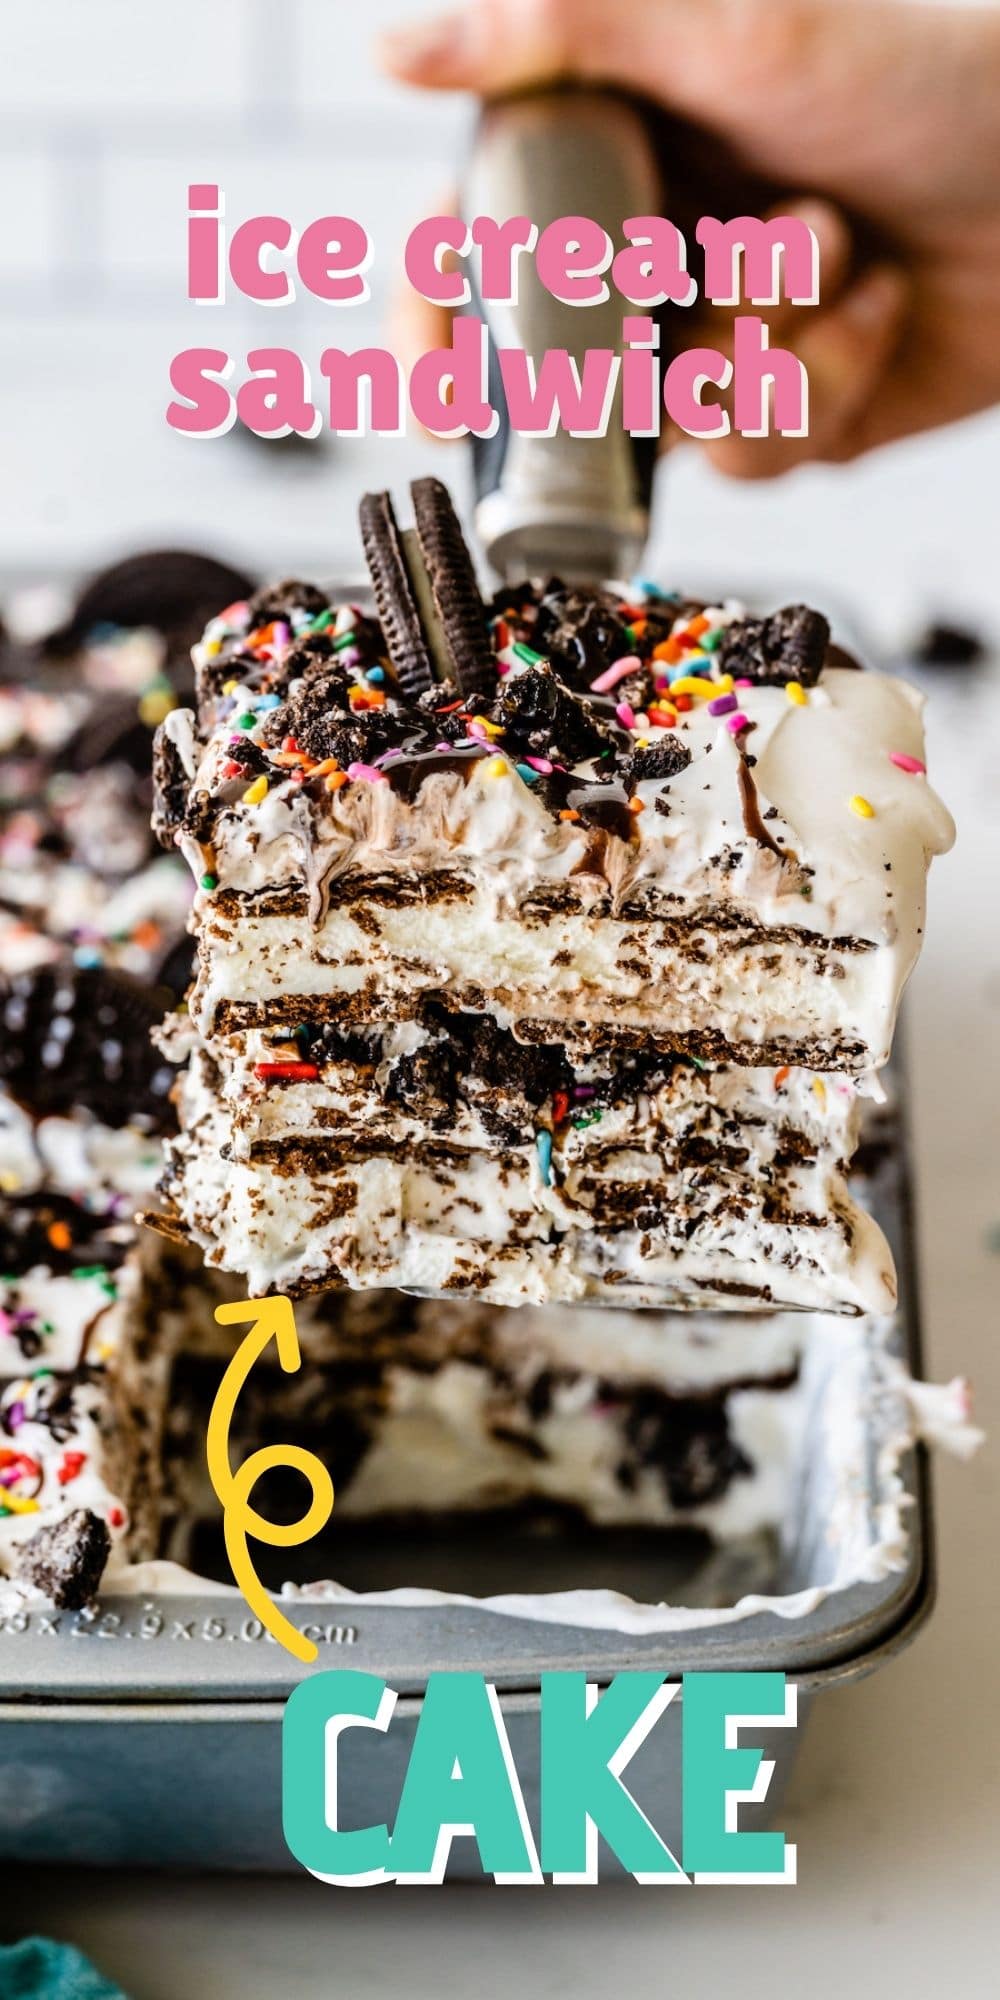 One corner piece of ice cream sandwich cake being scooped out of pan